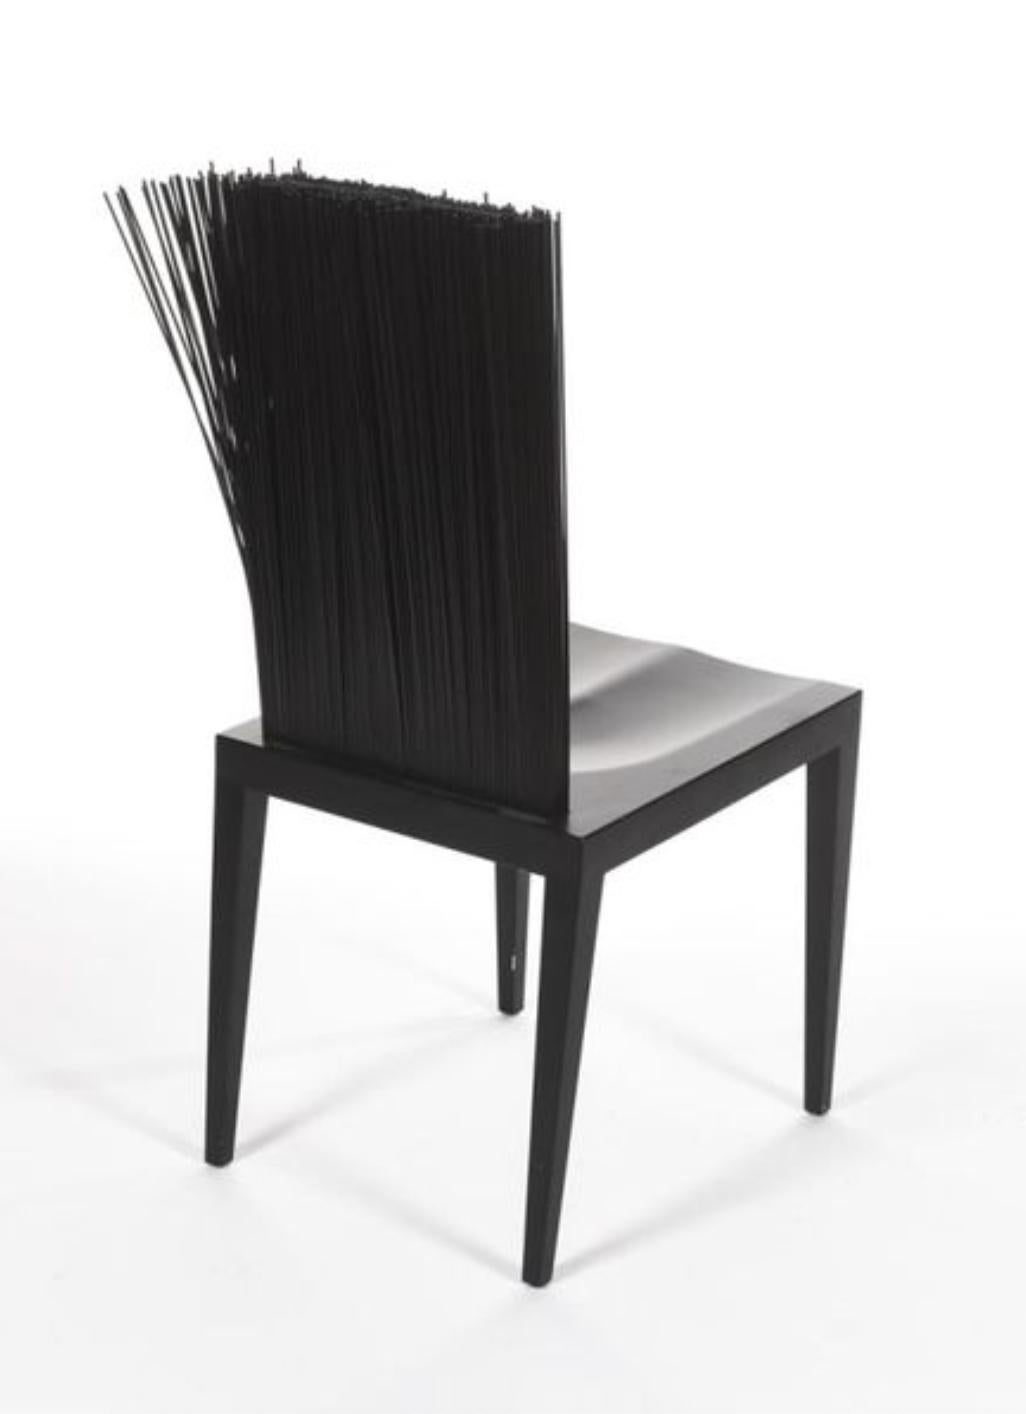 Jenette is a moulded chair made of rigid structural polyurethane, and with a metallic core. Its backrest is covered in about 900 flexible stalks made of rigid PVC.
Fernando (born 1961) & Humberto (born in 1953) Campana
Edition: Edra, circa